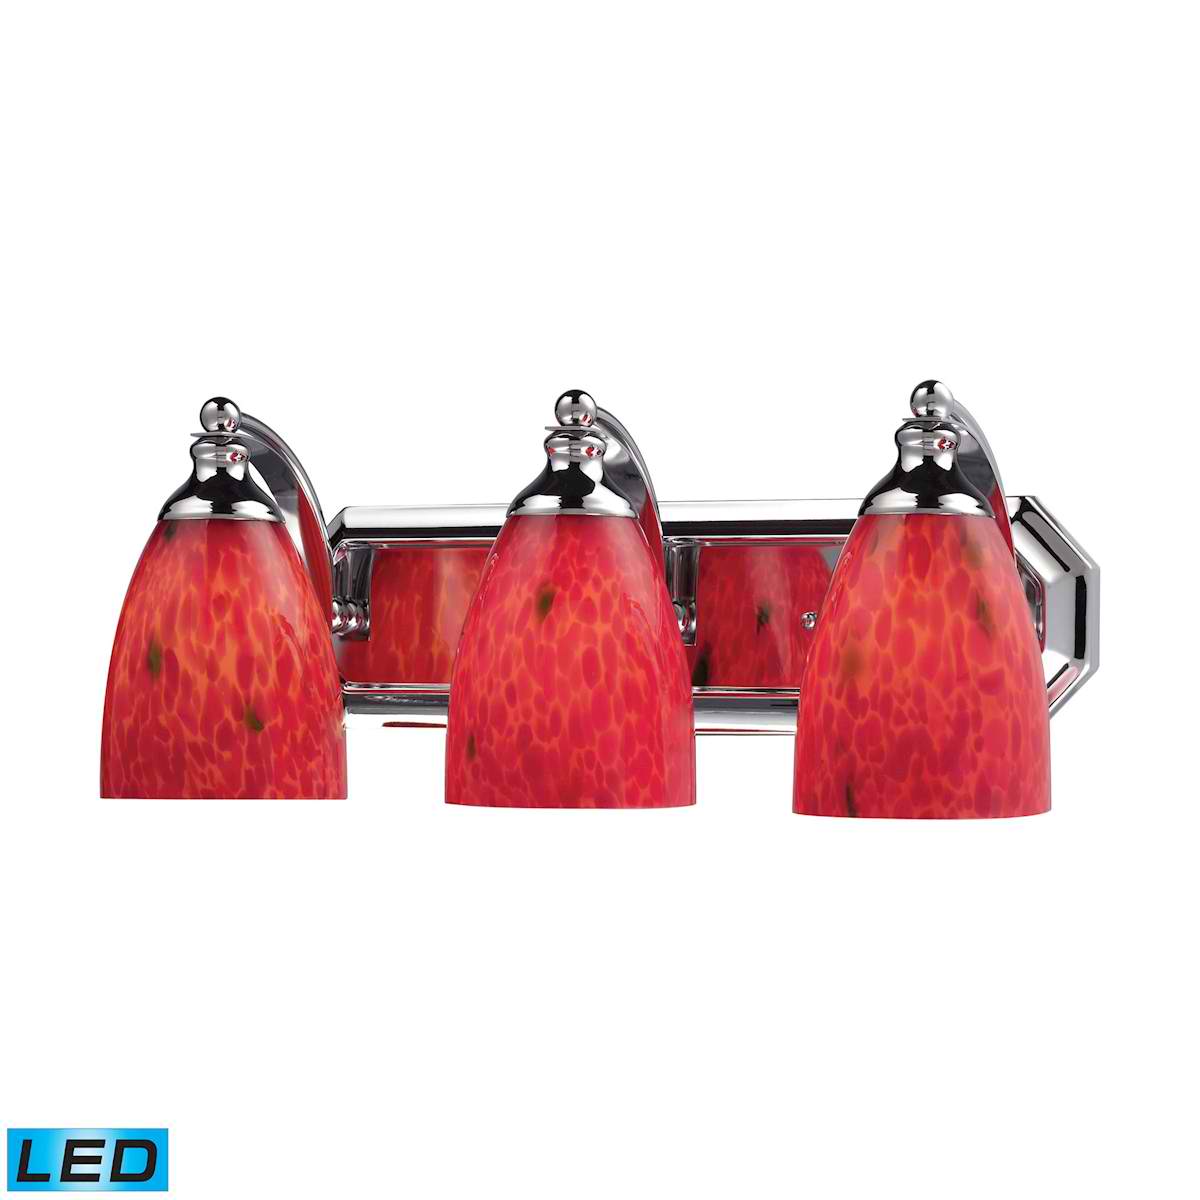 3 Light Vanity in Polished Chrome and Fire Red Glass - LED, 800 Lumens (2400 Lumens Total) with Full Scale